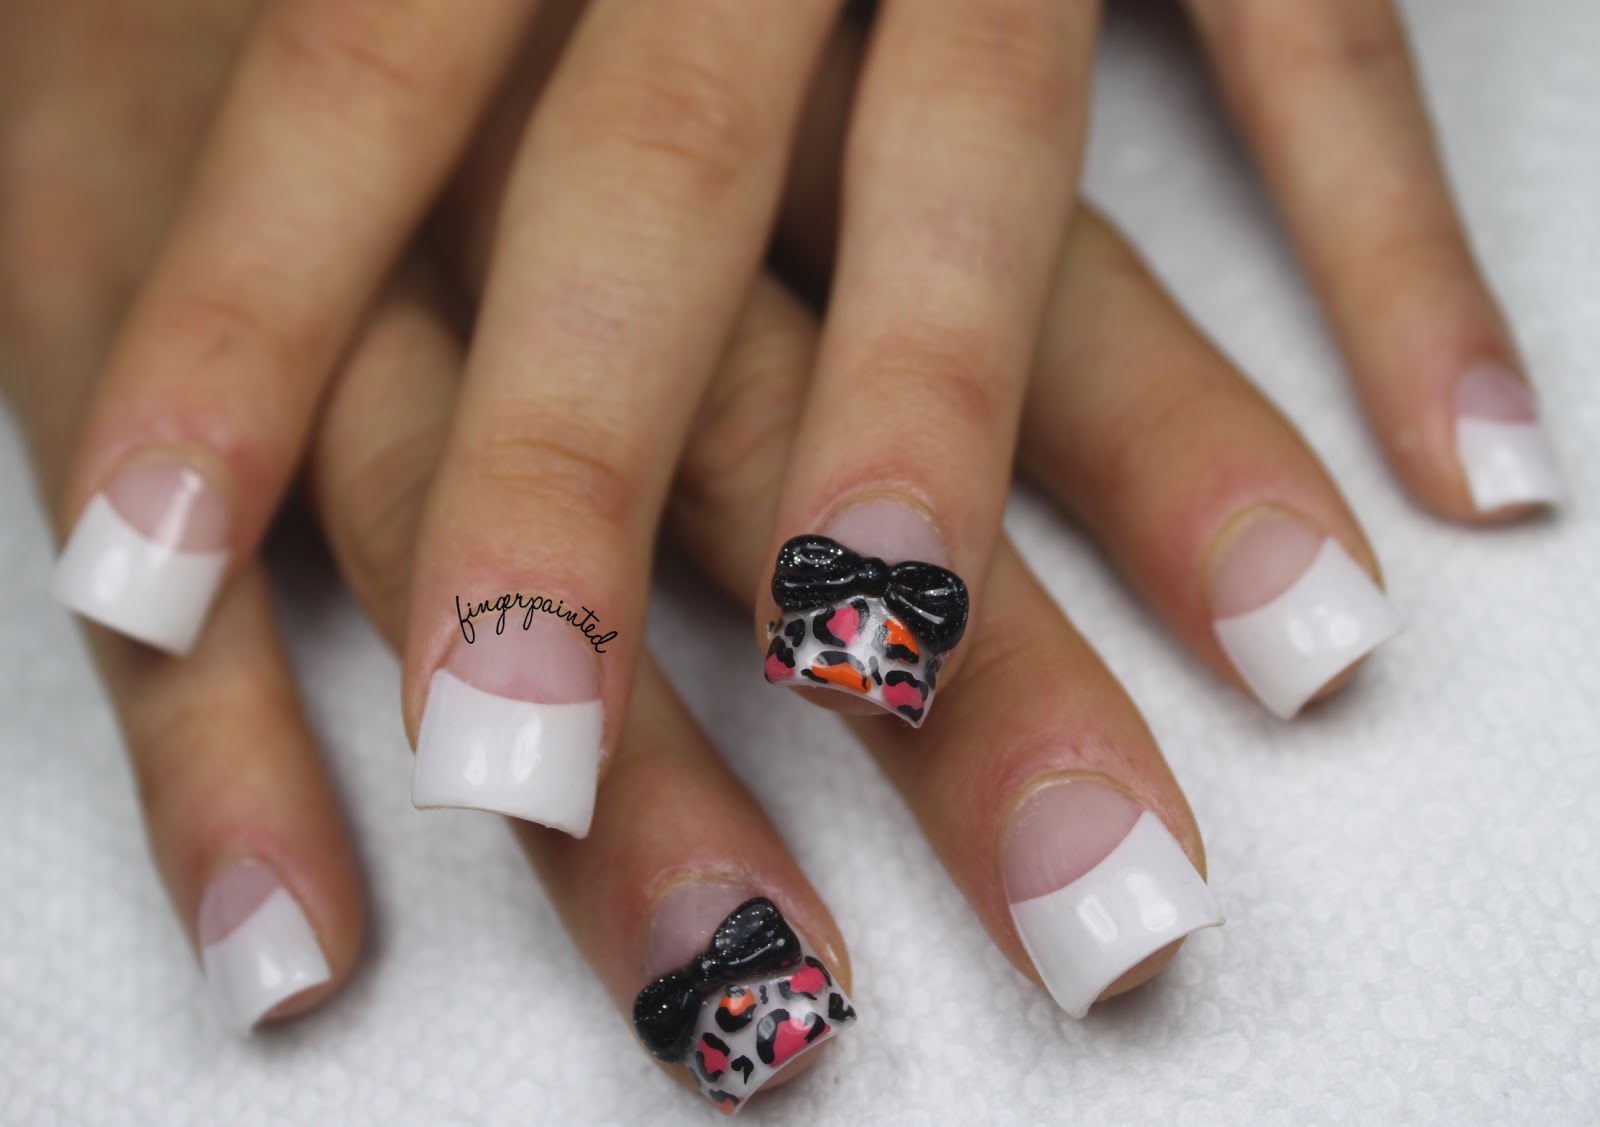 1. Cute Nail Designs with Bows on Tumblr - wide 4